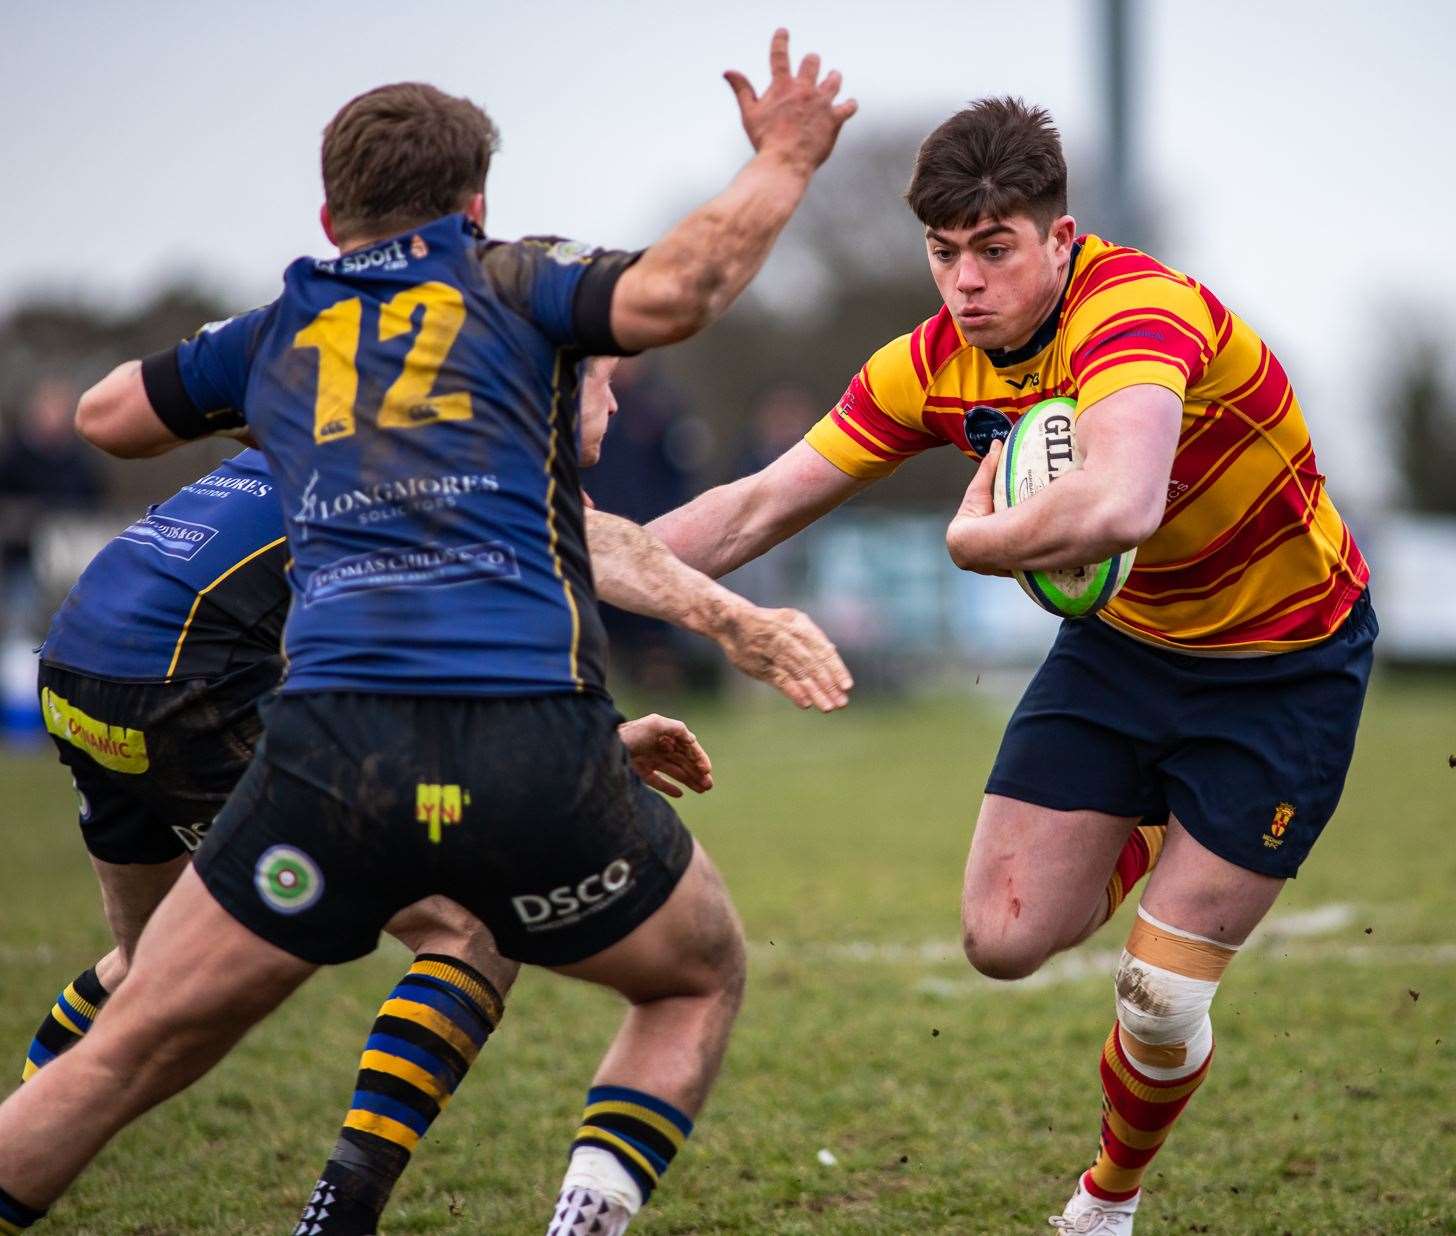 Medway's Max Bullock scored his side's try against Hertford. Picture: Jake Miles Sports Photography